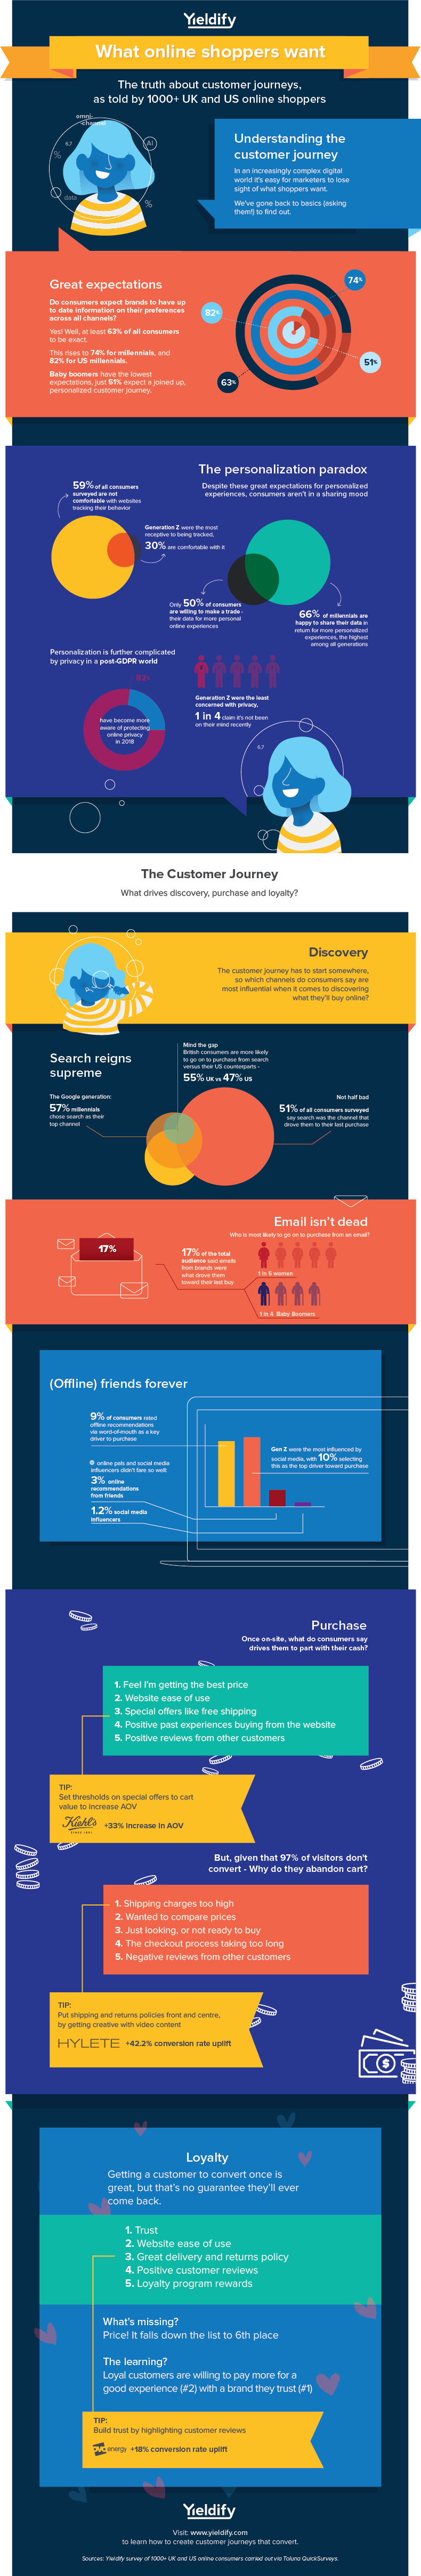 What online shoppers want [Infographic]